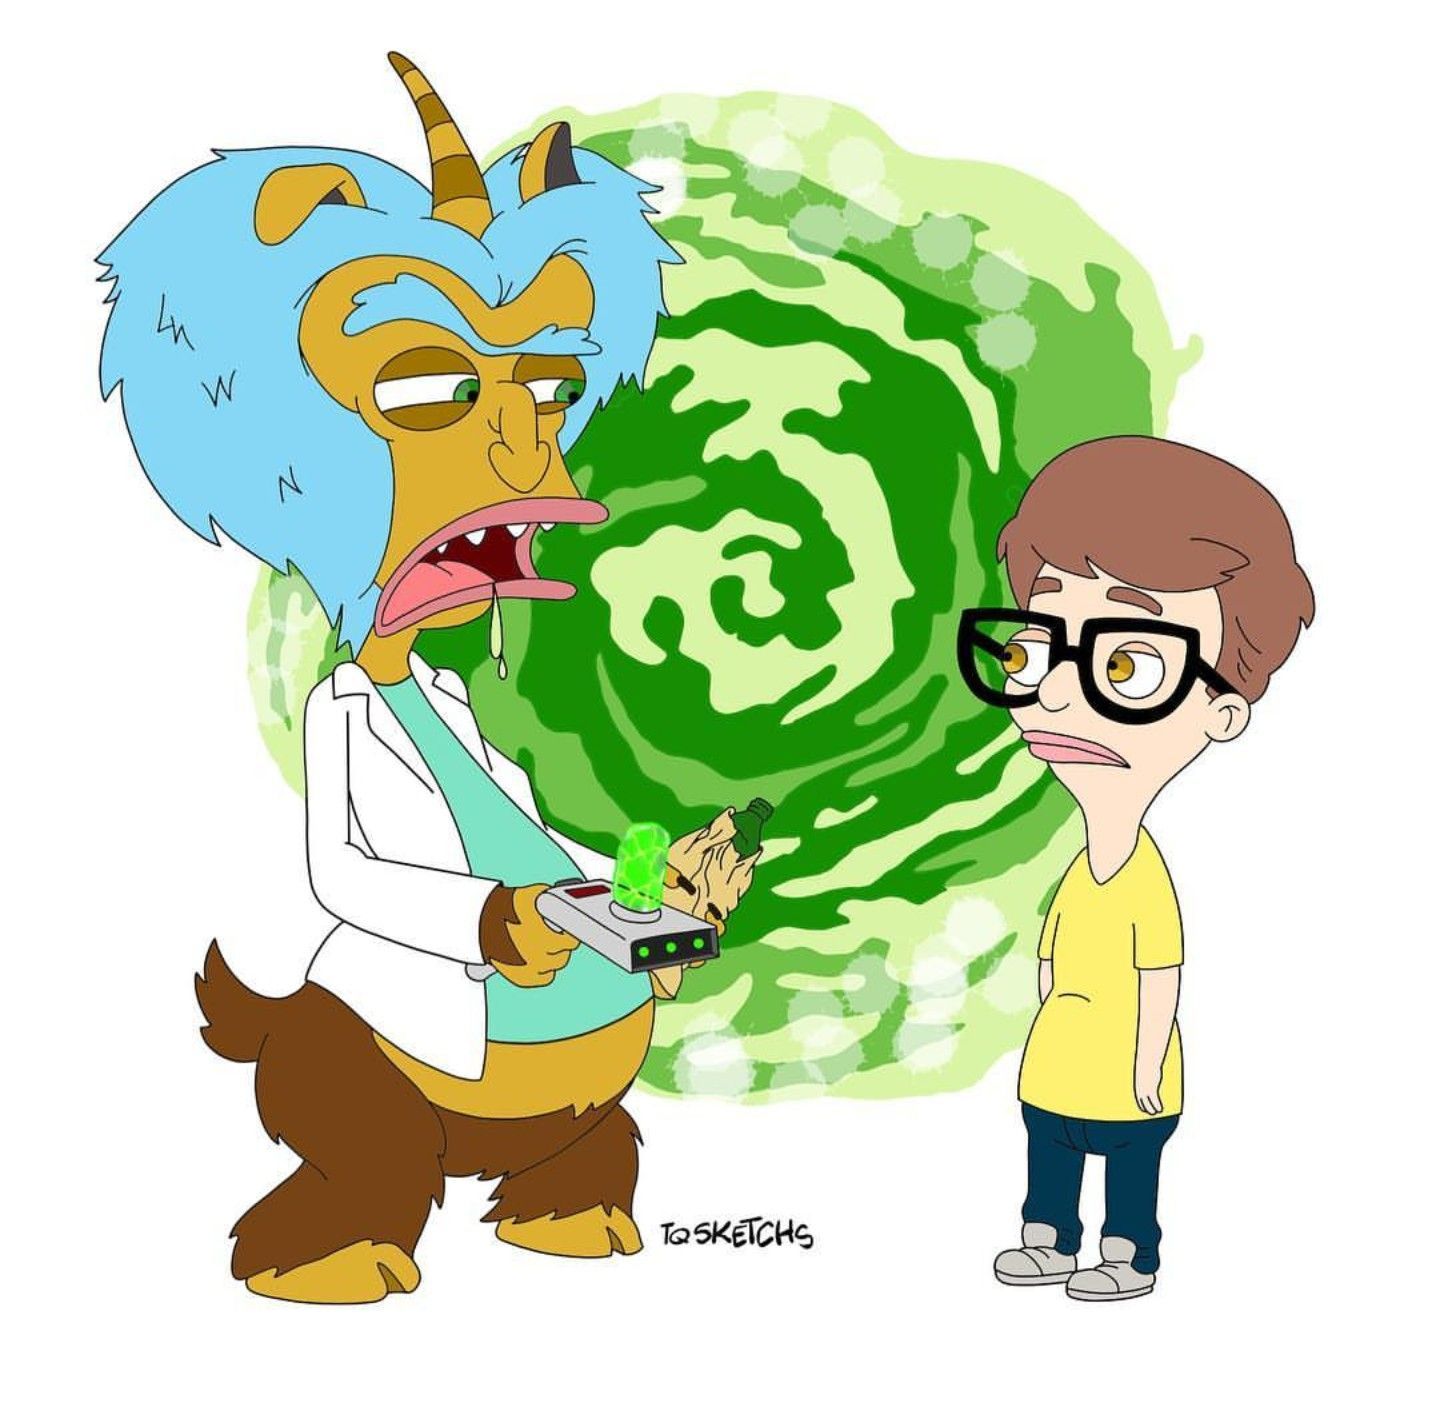 Rick and Morty x Big Mouth. Rick and morty characters, Cartoon